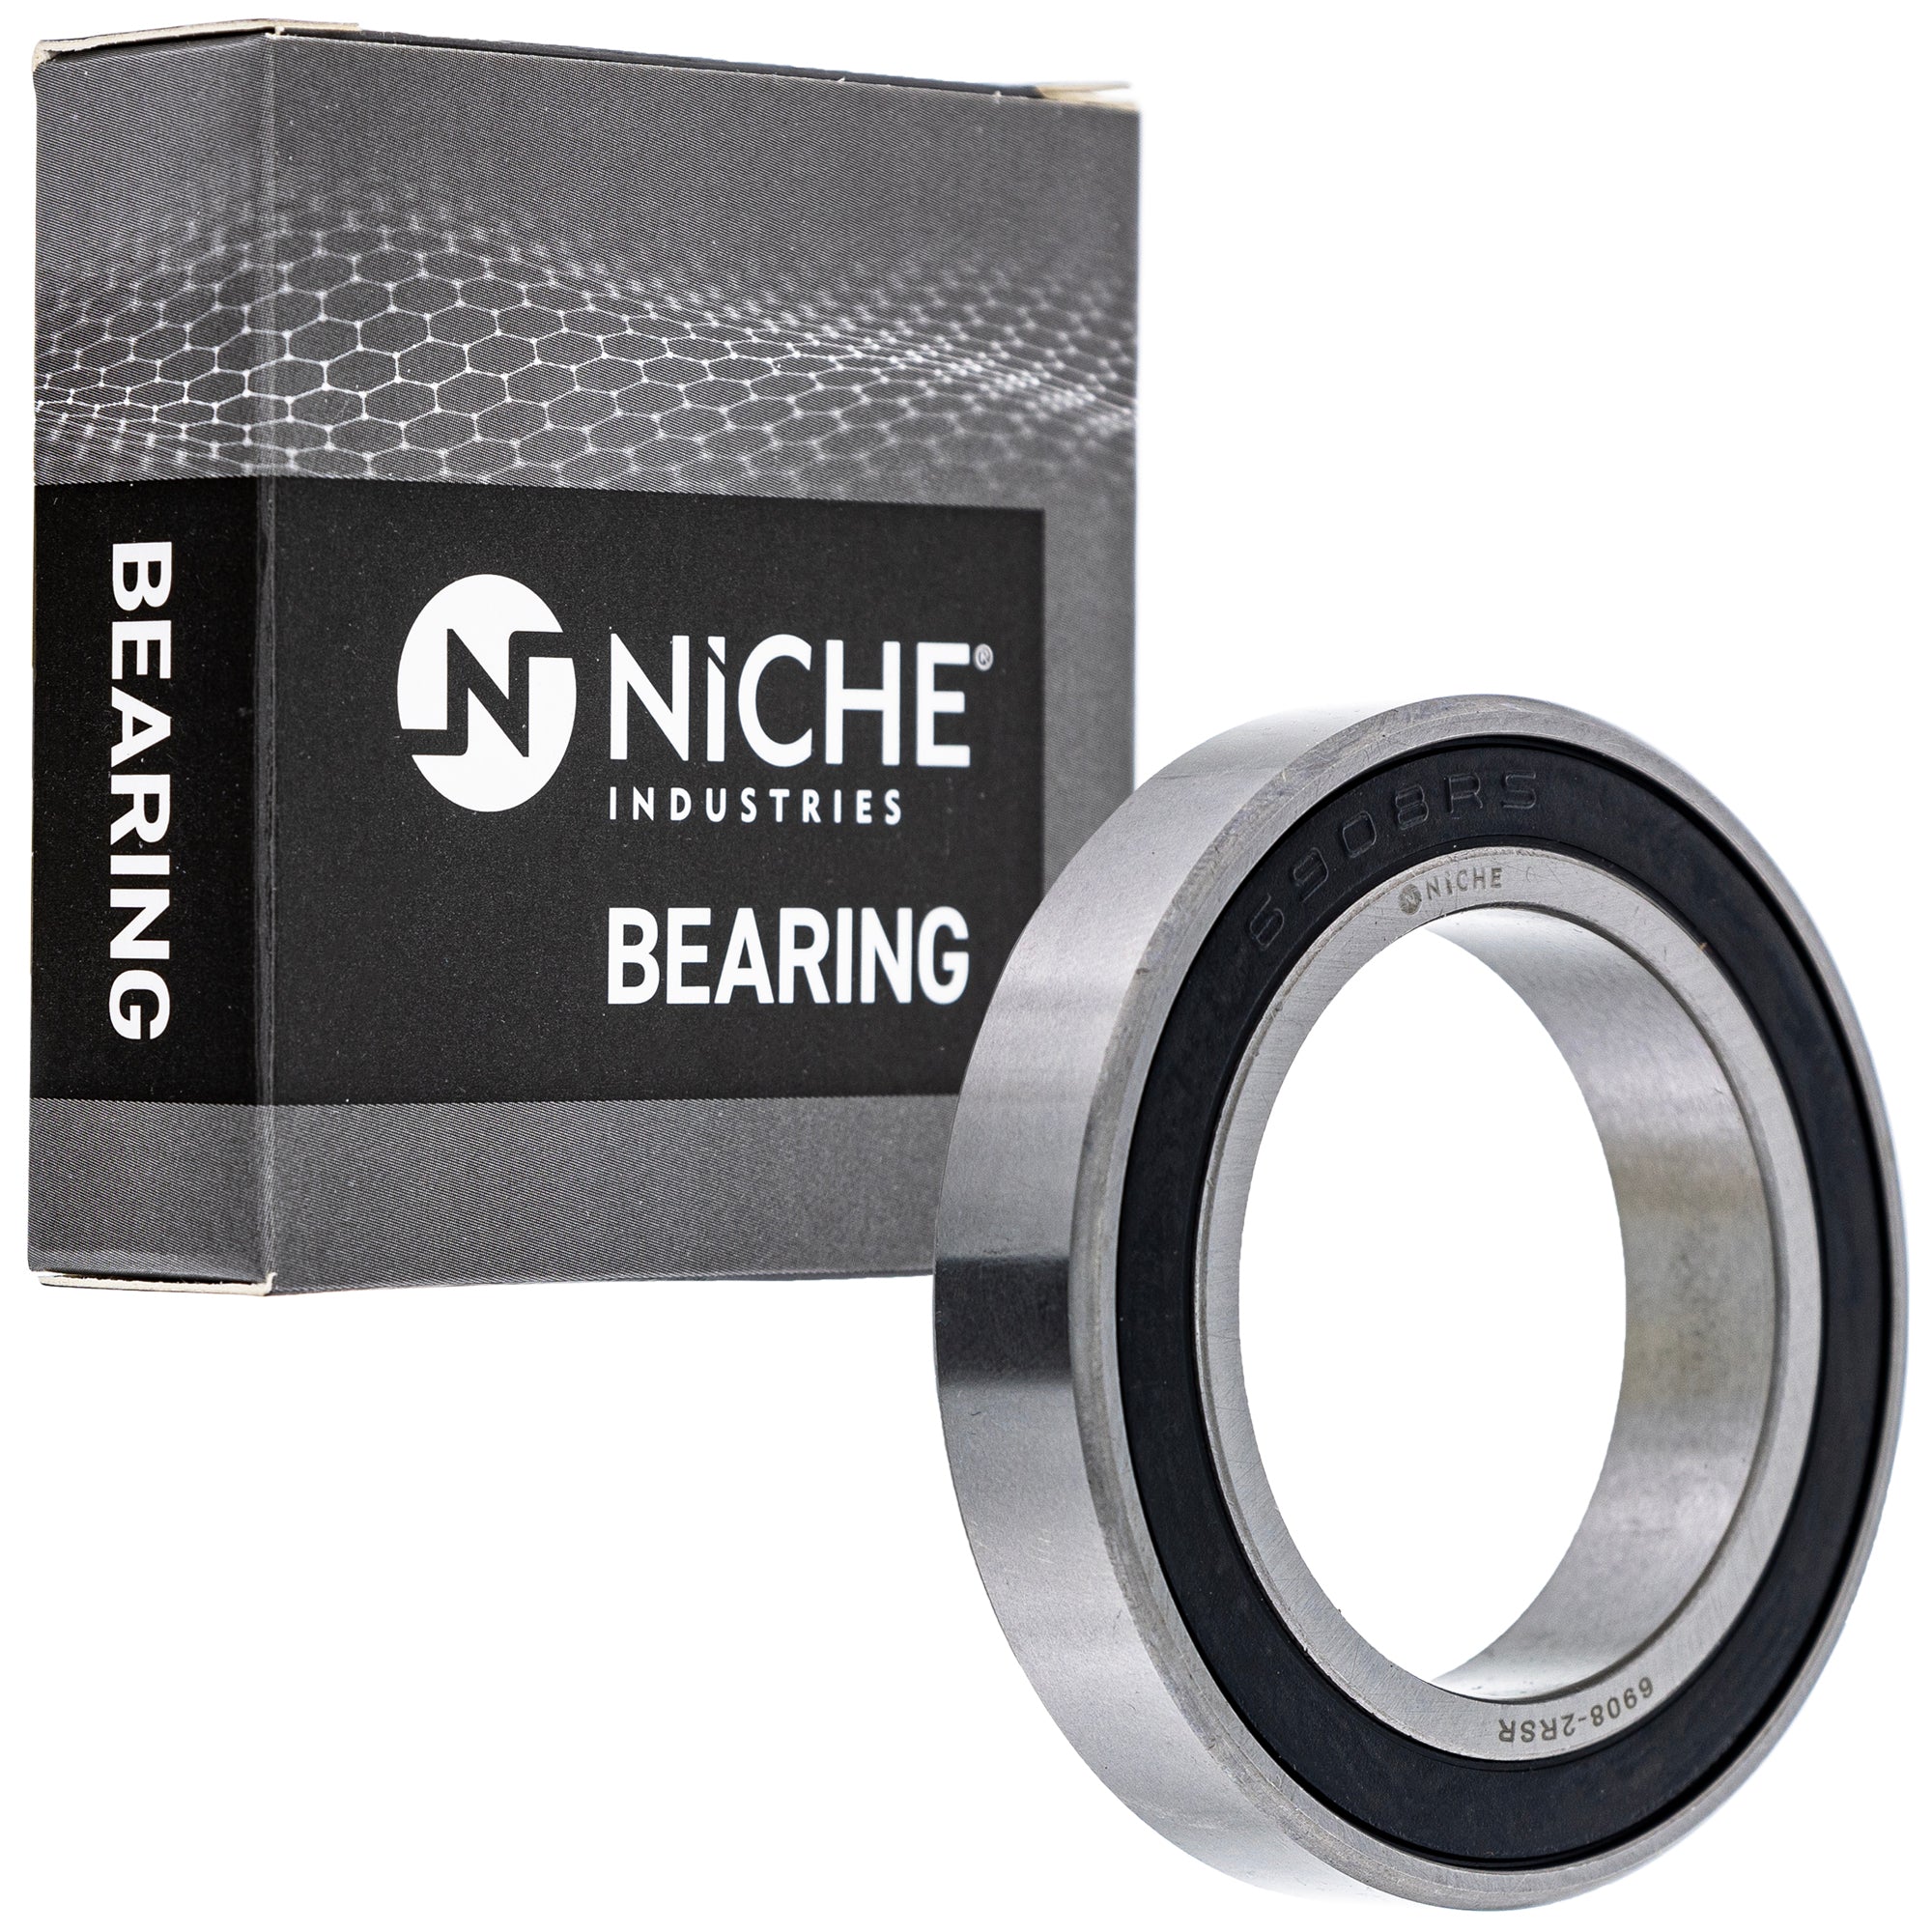 NICHE 519-CBB2330R Bearing 10-Pack for zOTHER BRP Can-Am Ski-Doo